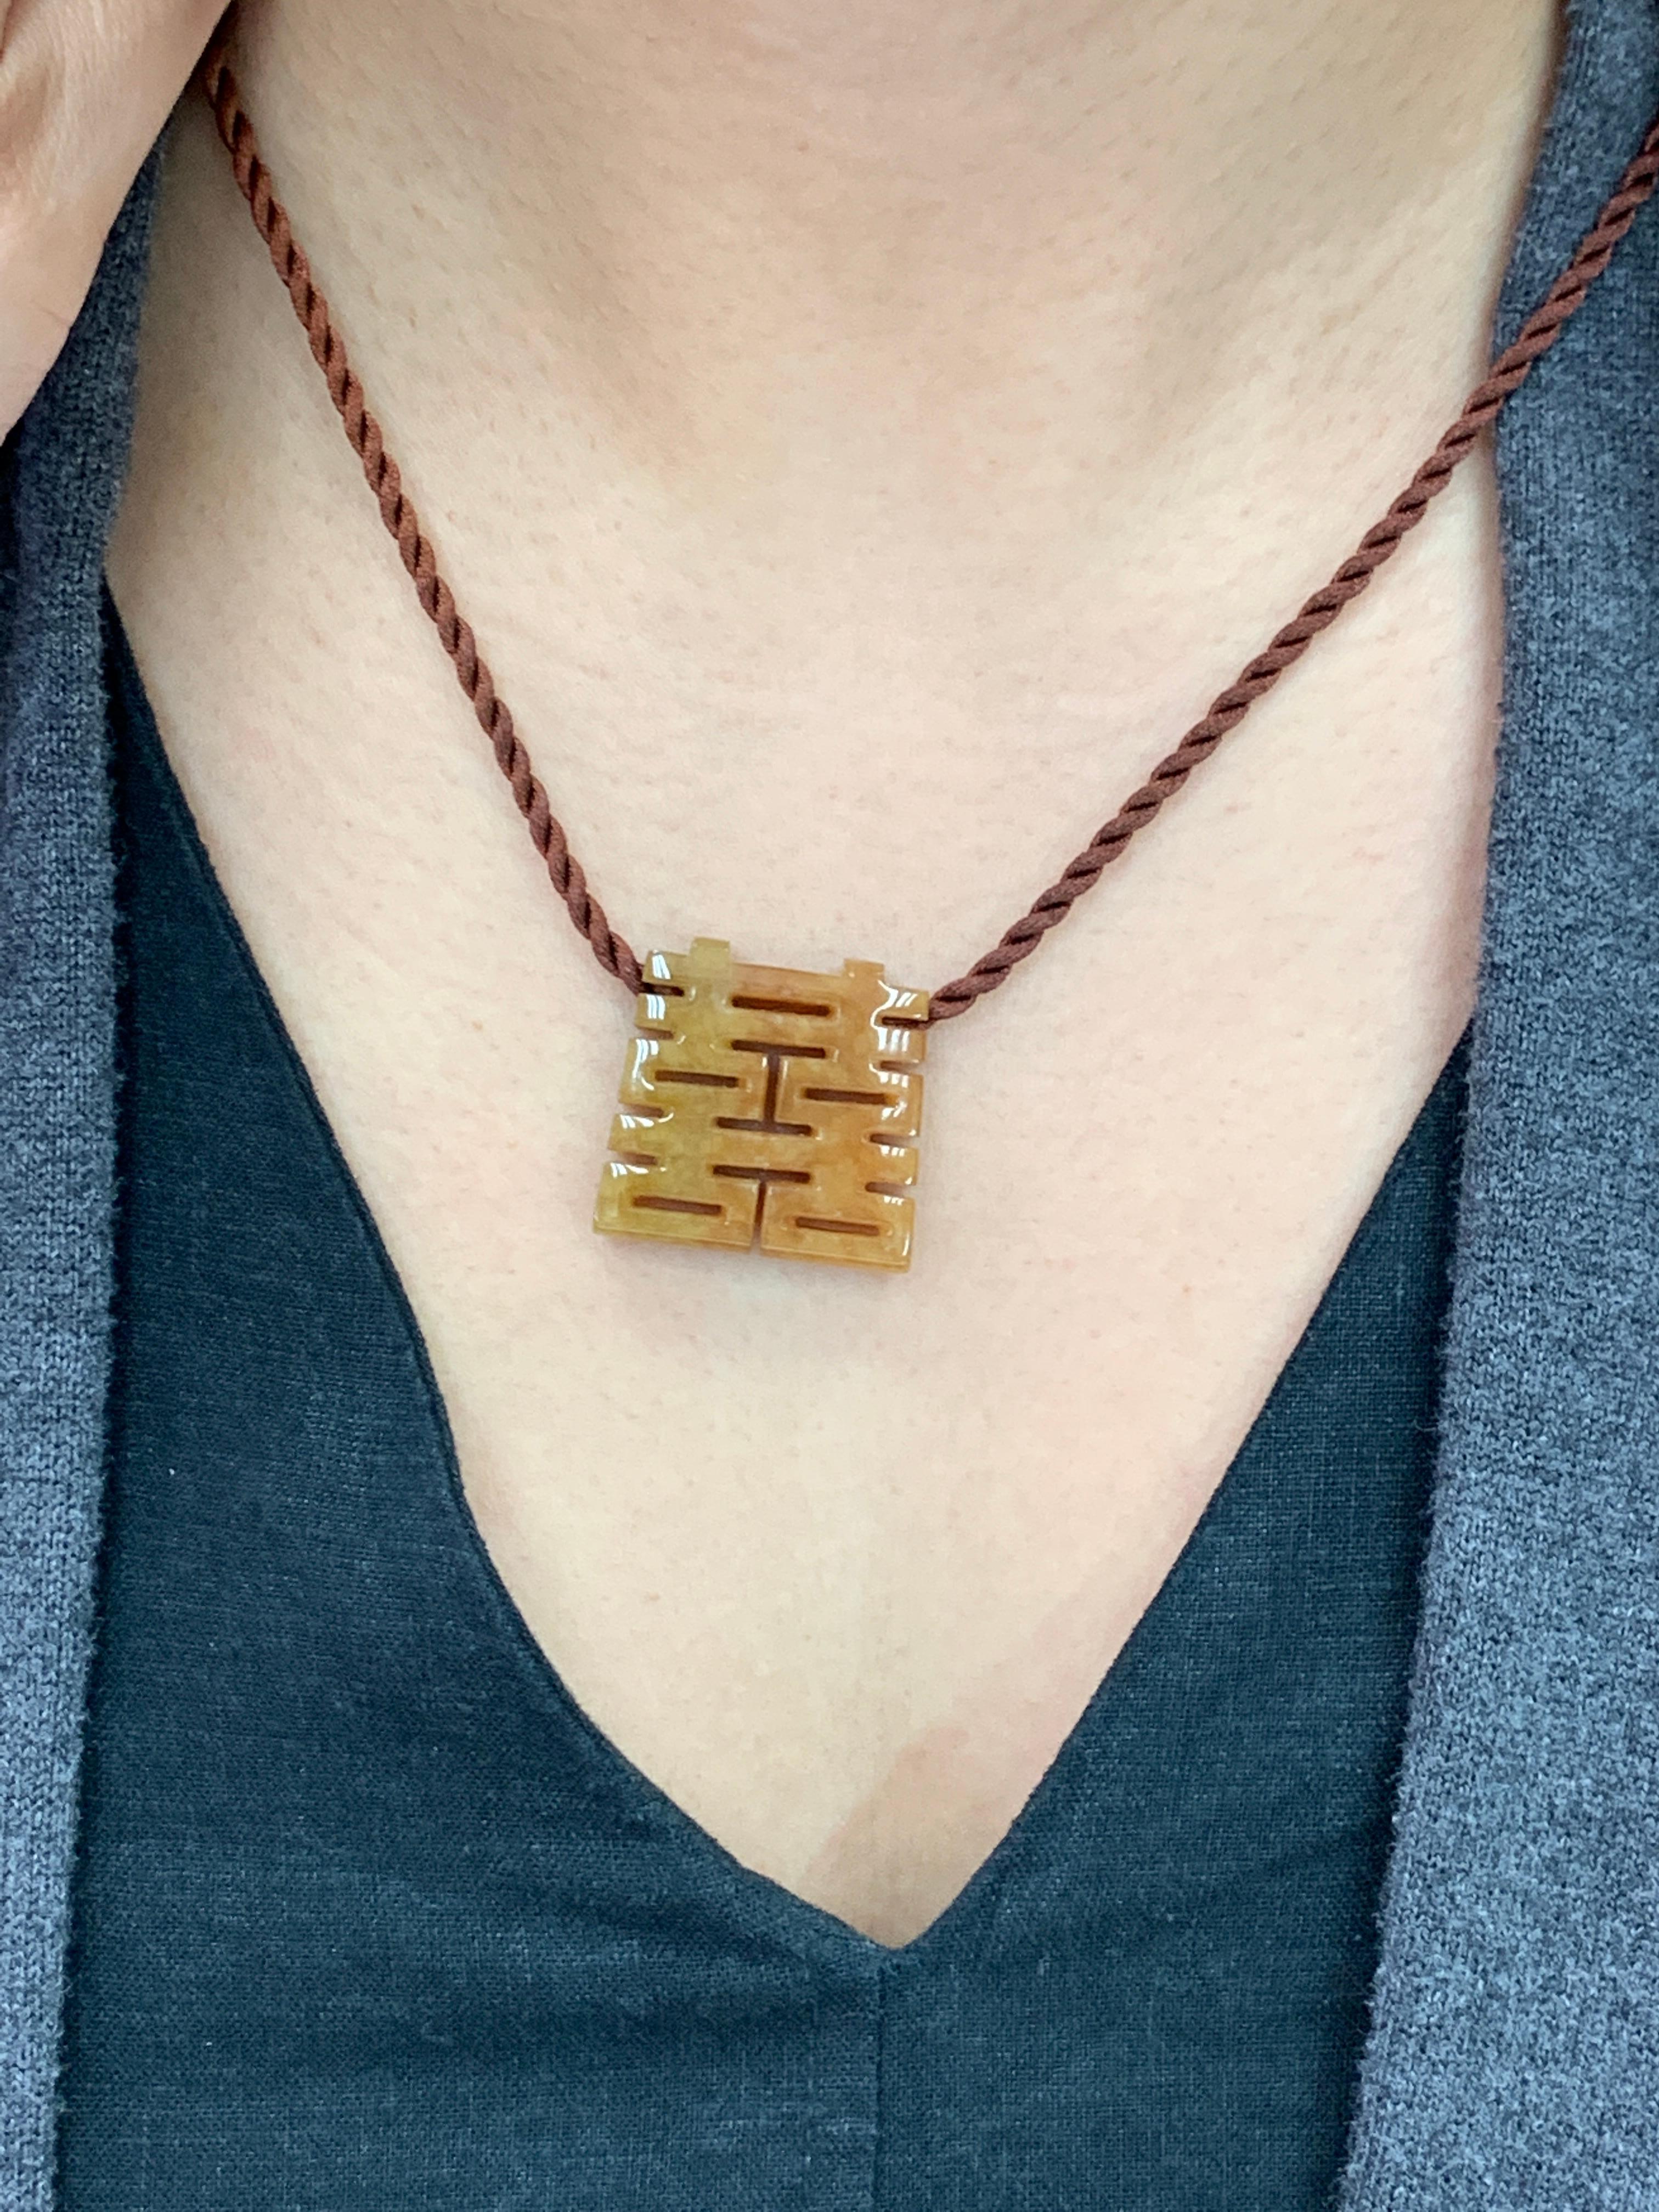 Here is an unusual Jade pendant. This pendant has that special brown (red) color that you don't see often. The pendant is also hollowed out from one bigger piece of jade rough material. This type of carving is not easy to do. The Chinese character